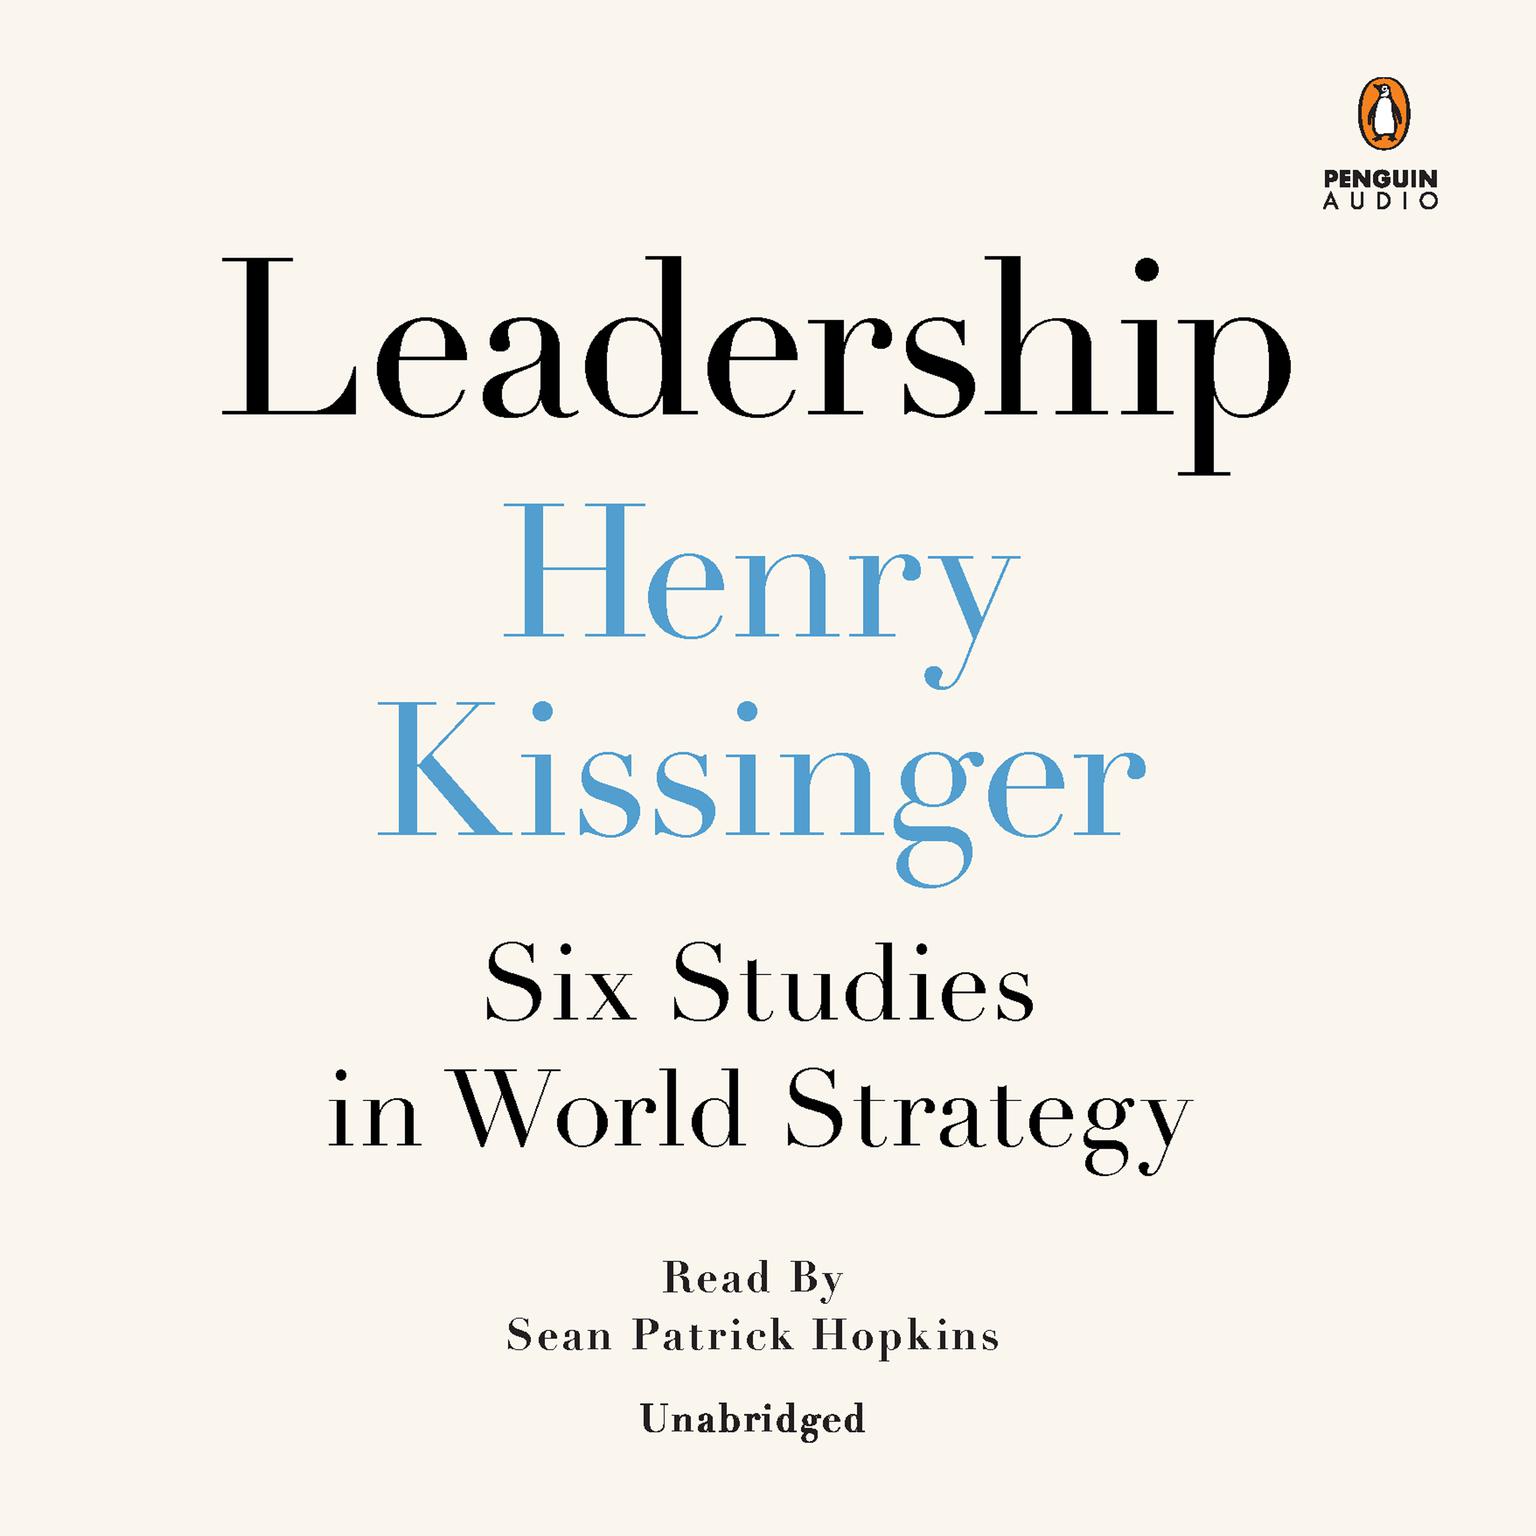 Leadership: Six Studies in World Strategy Audiobook, by Henry A. Kissinger